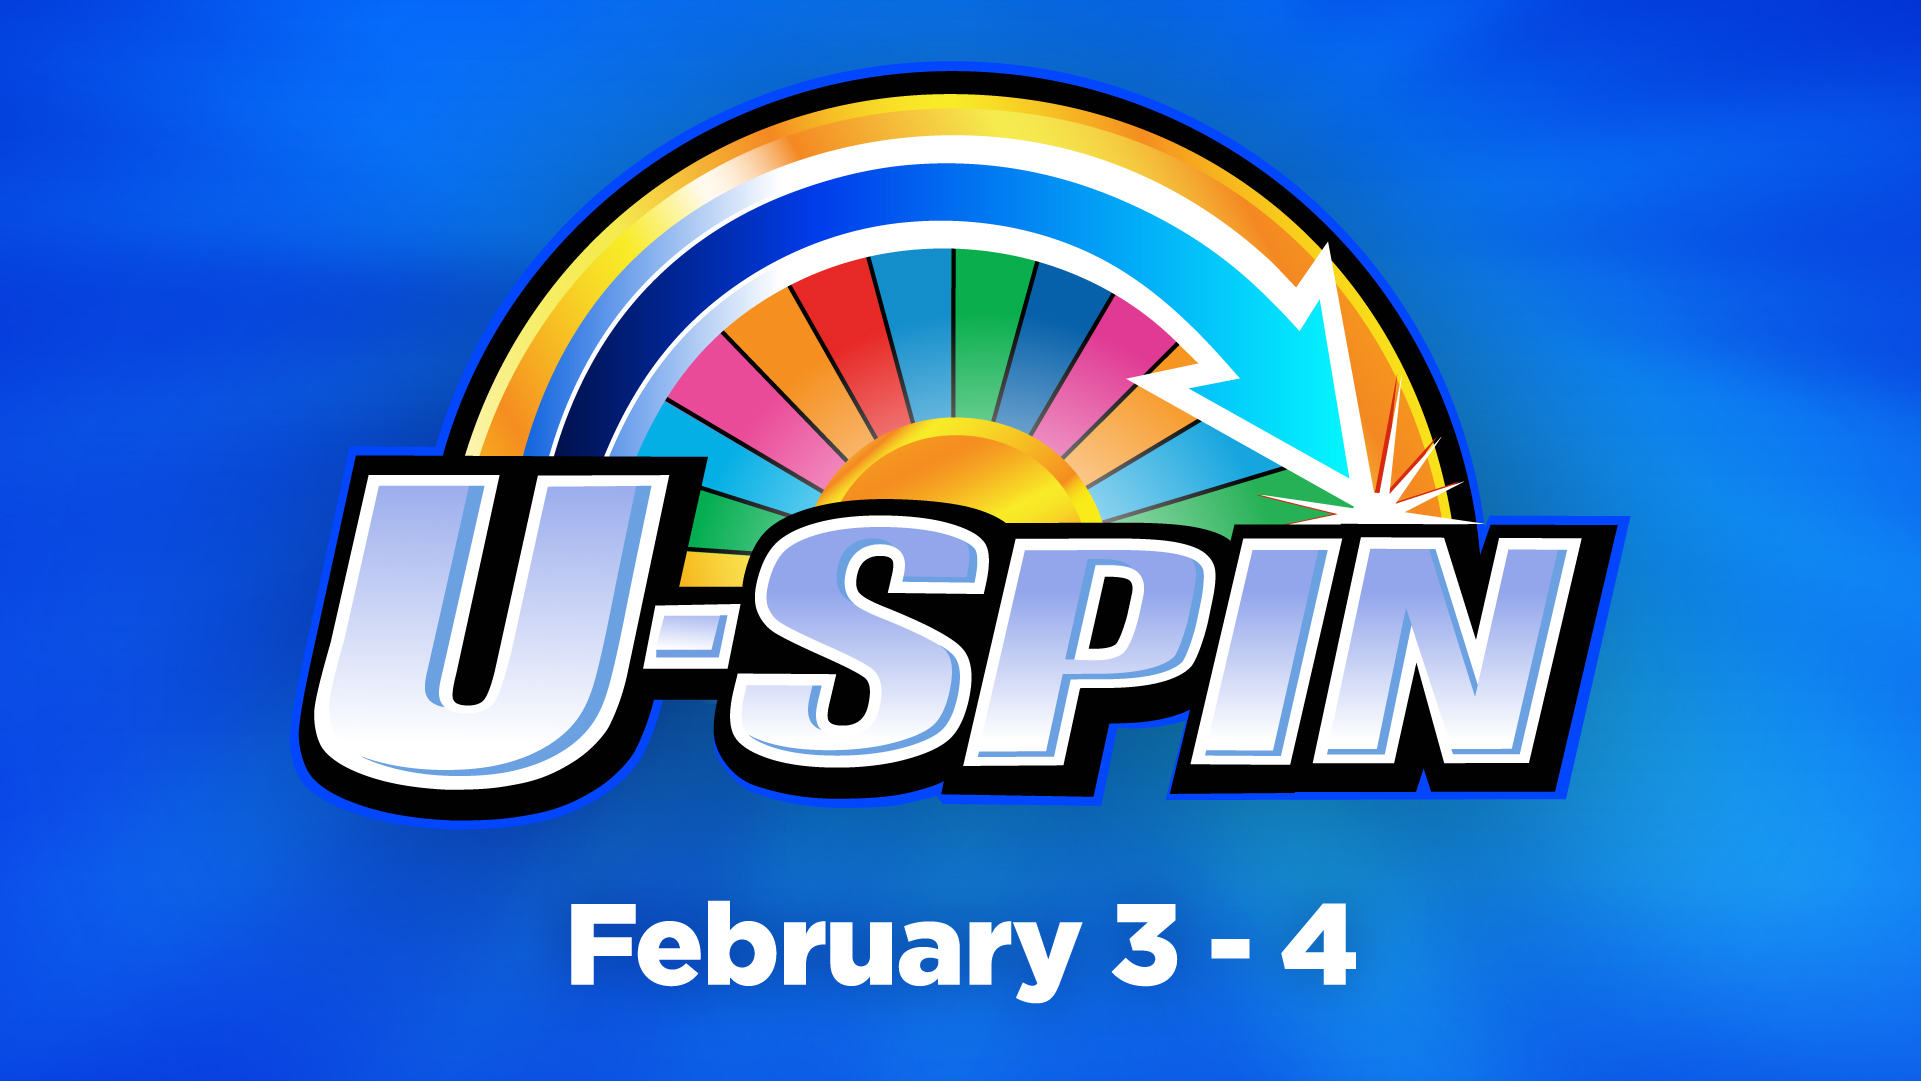 U-Spin February 3-4 Win Your Share Of Over $25,000 In Free Play! How To Play 1. Play on any eligible slot machine 2. Fill up the Progress Bar 3. Spin for your chance to win! Maximum (10) spins per day!